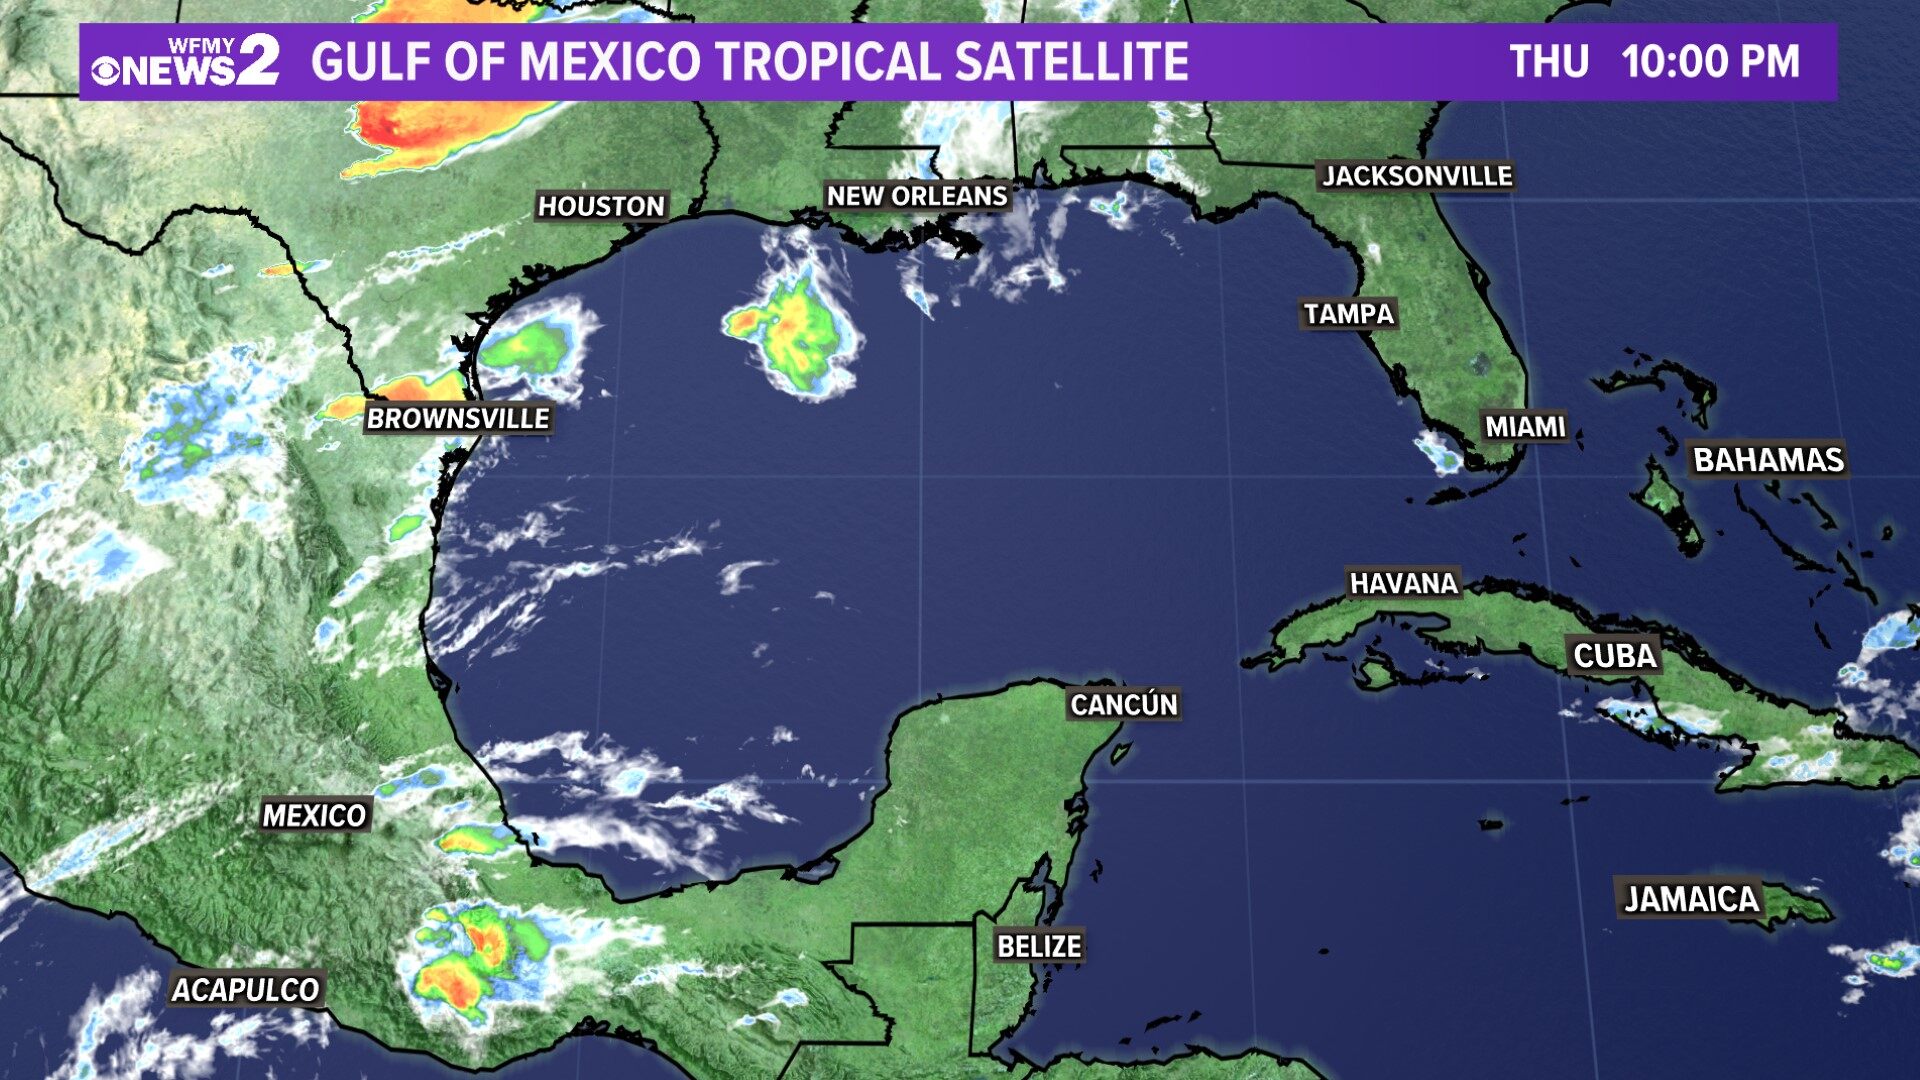 Tropical Satellite Gulf of Mexico